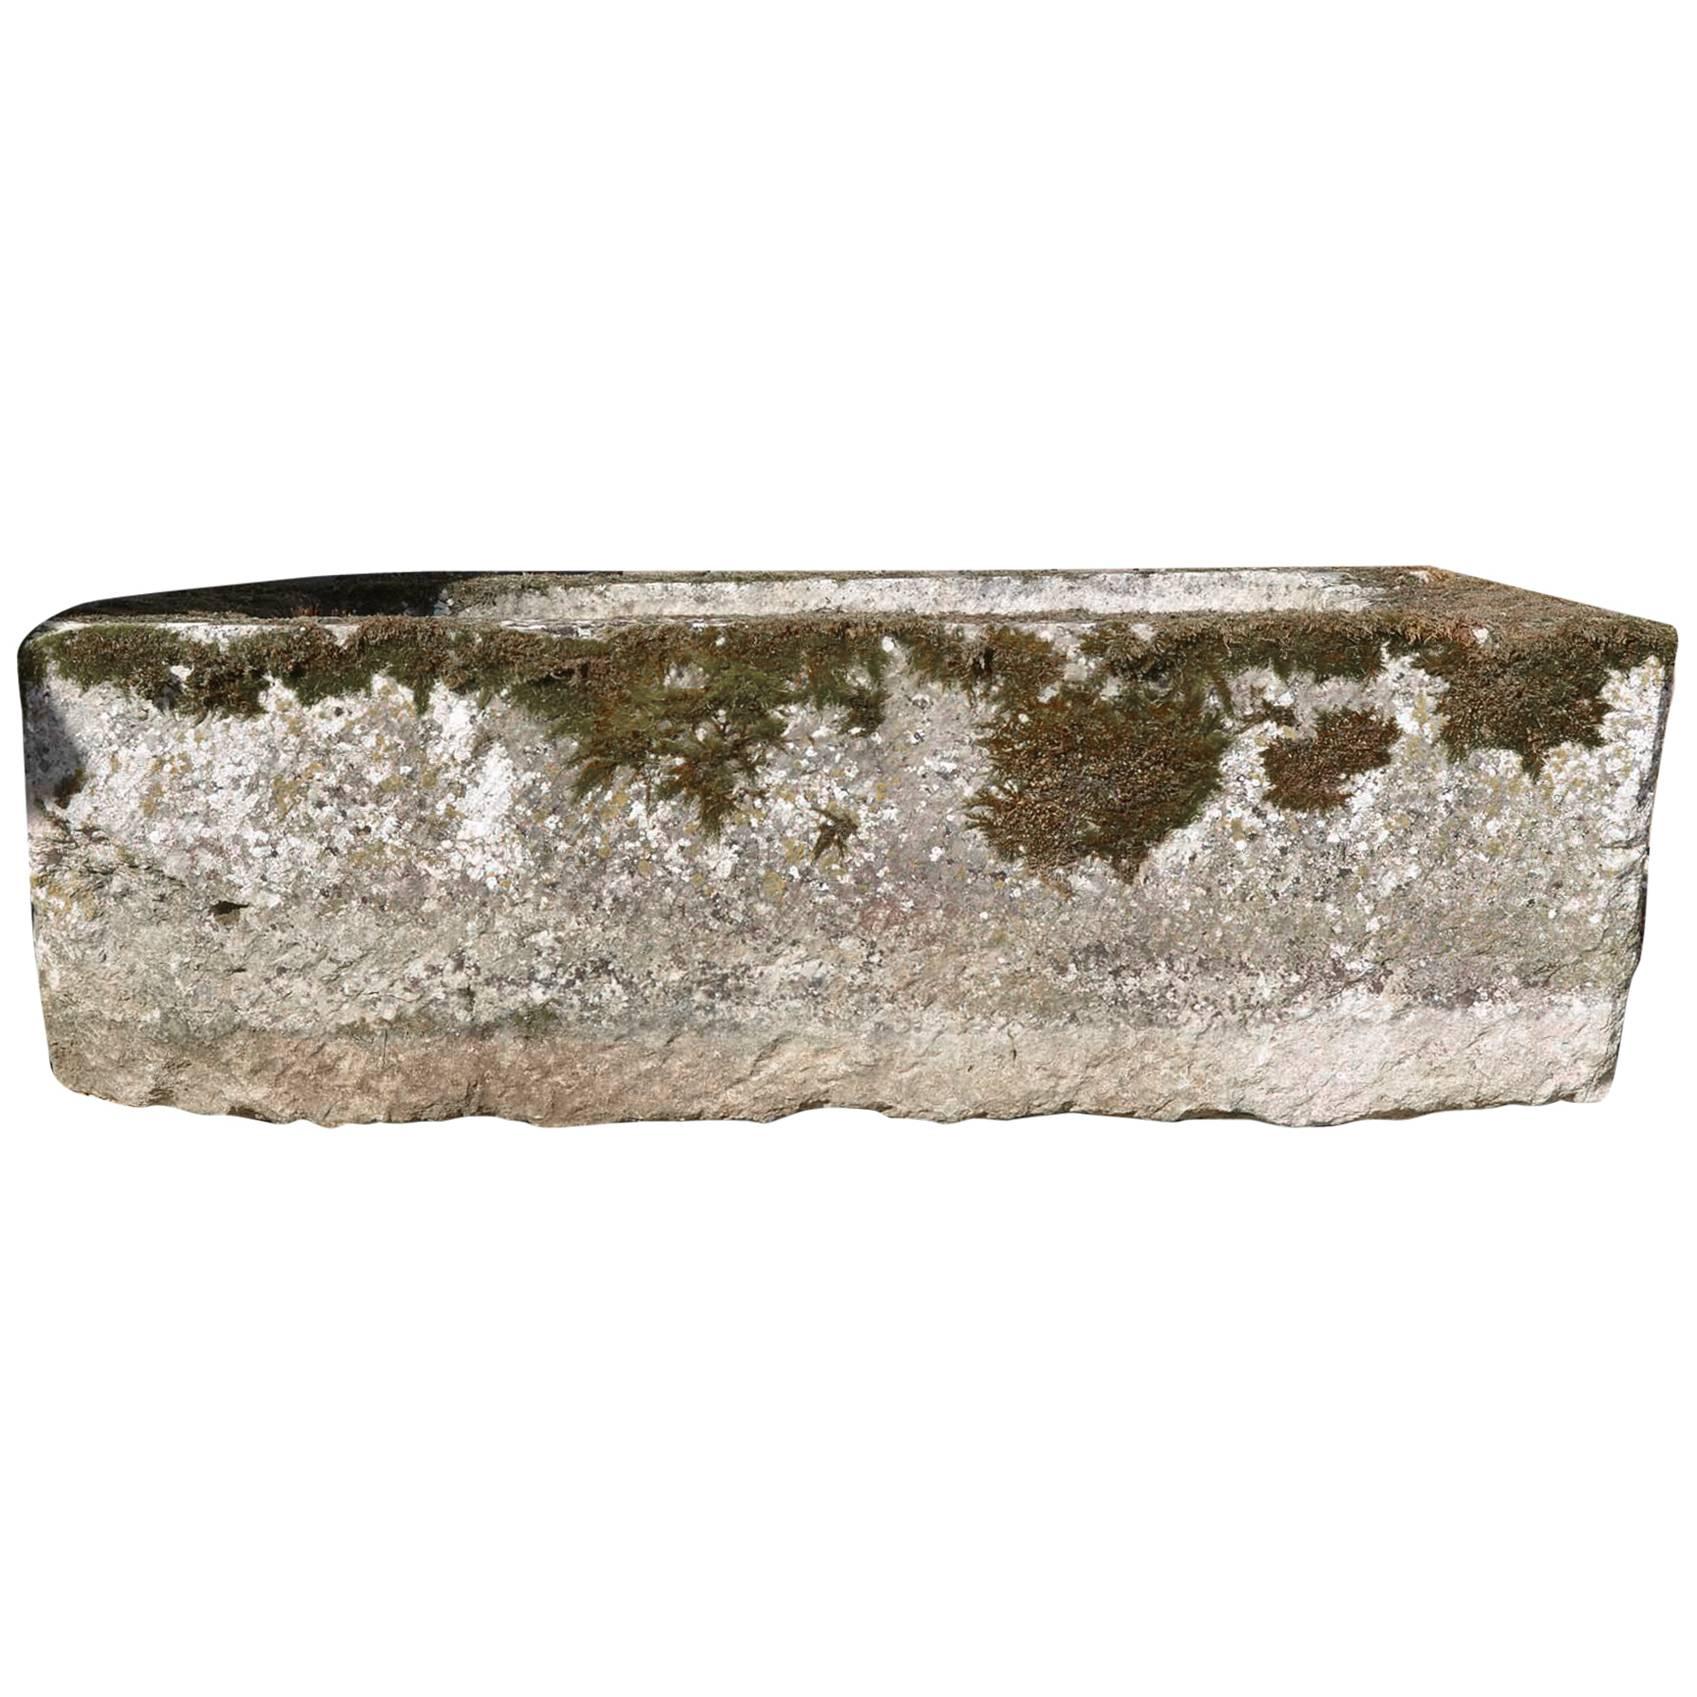 Large 18th Century Stone Trough with Good Weathering and Patination